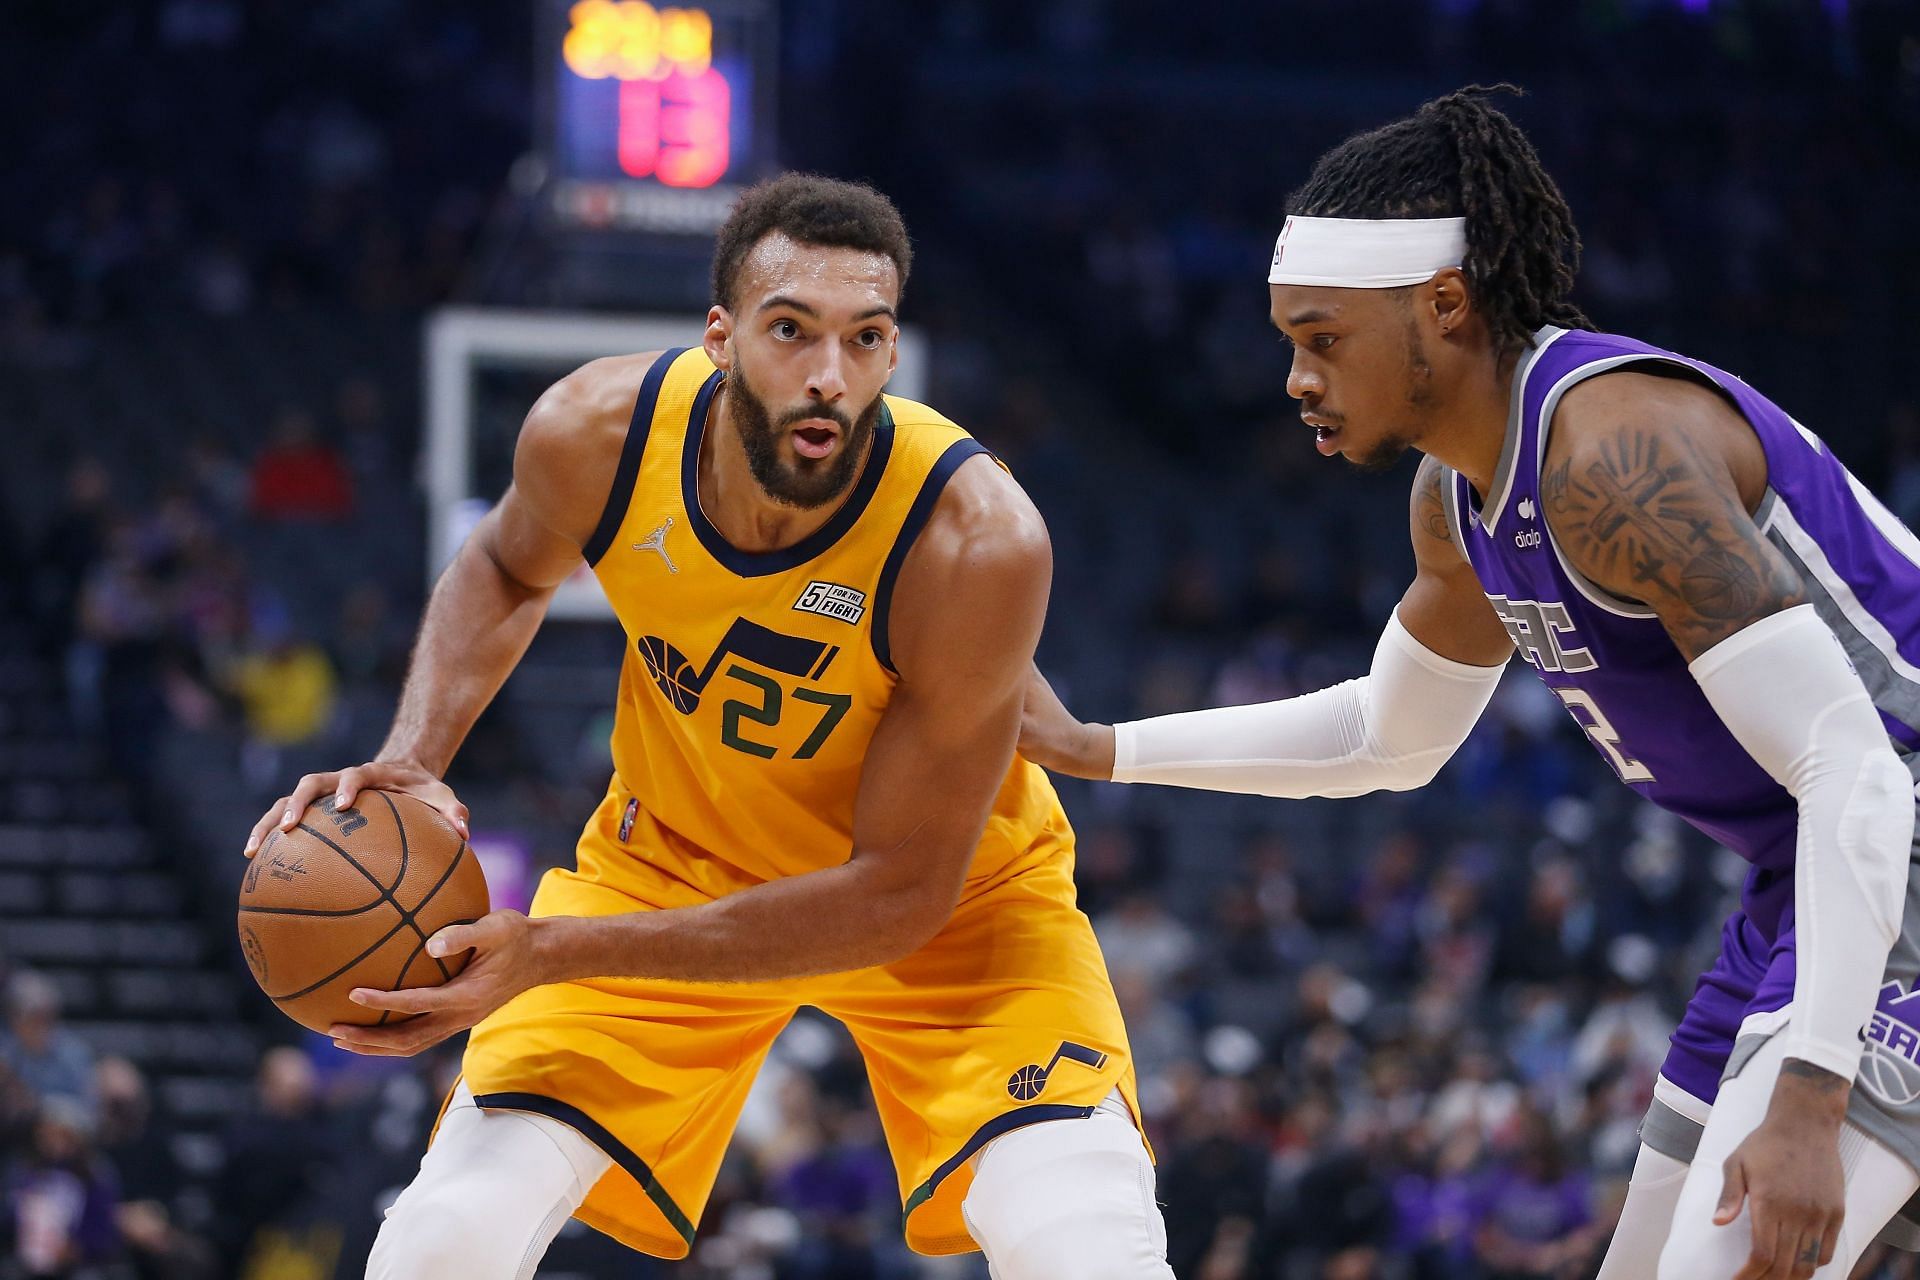 Utah Jazz big man Rudy Gobert continues to impress on both sides of the ball.